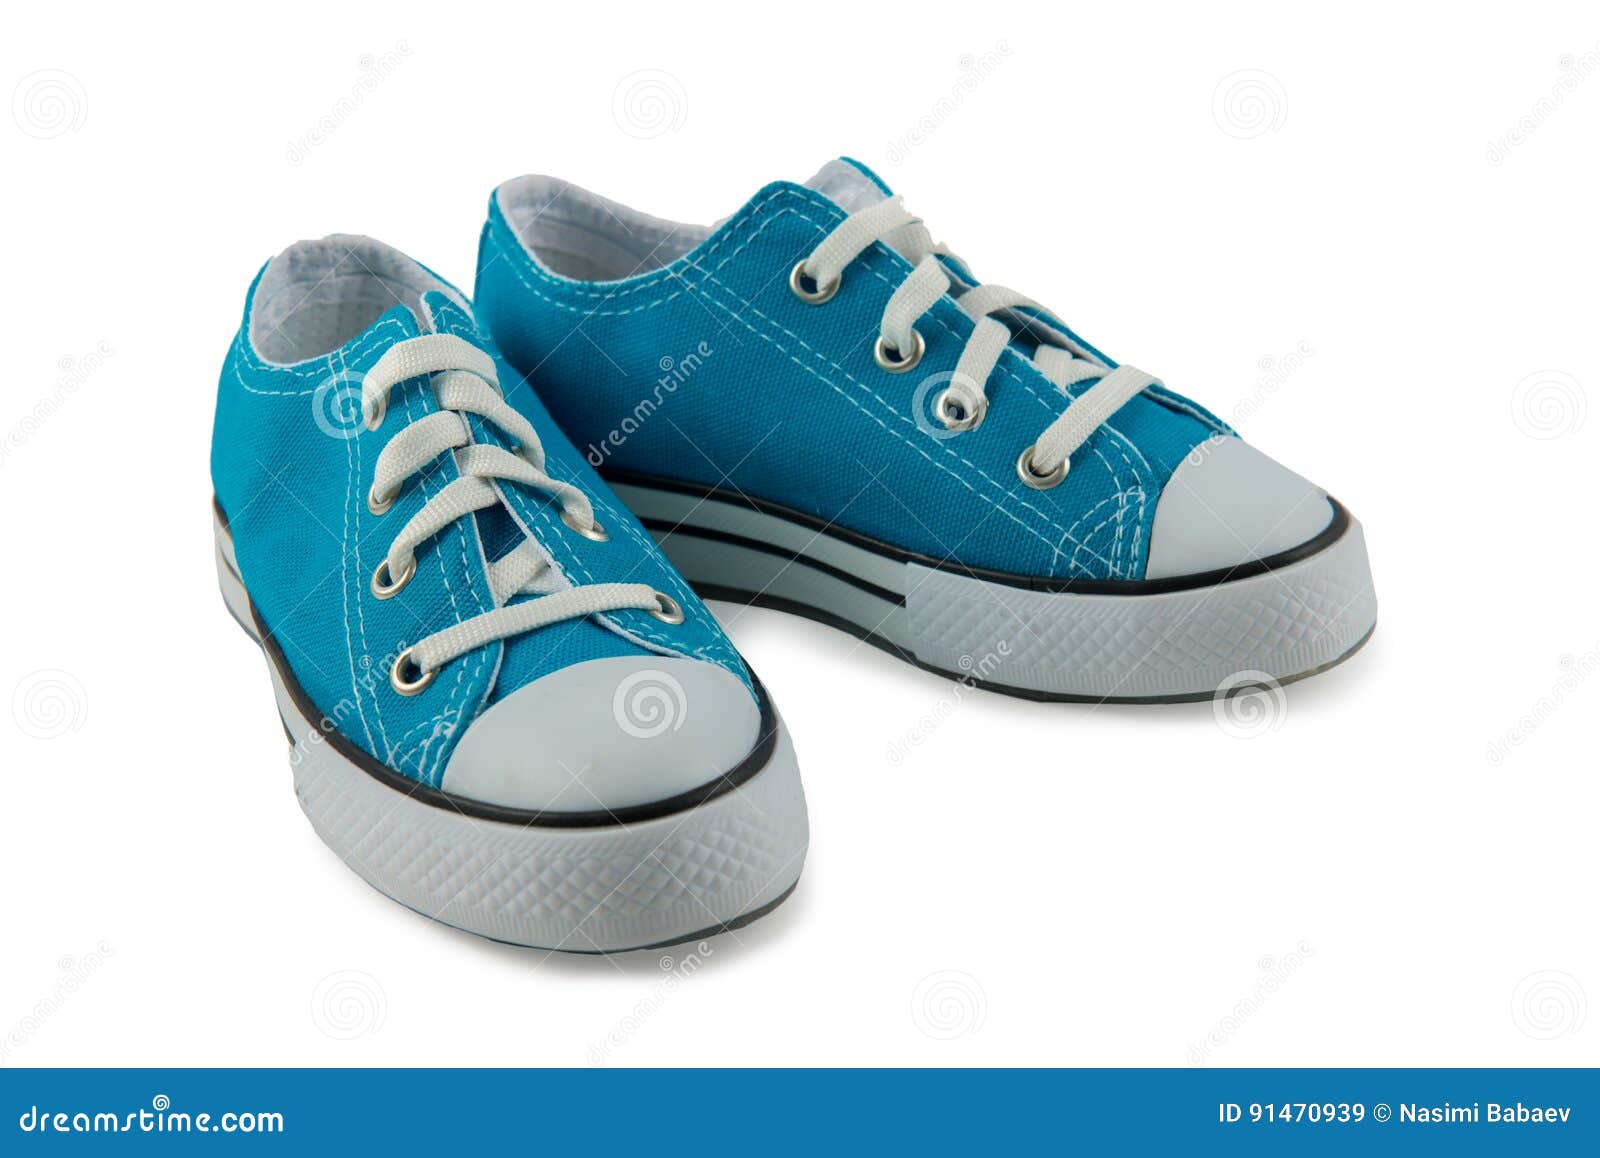 Children`s Sneakers Isolated on a White Background Stock Image - Image ...